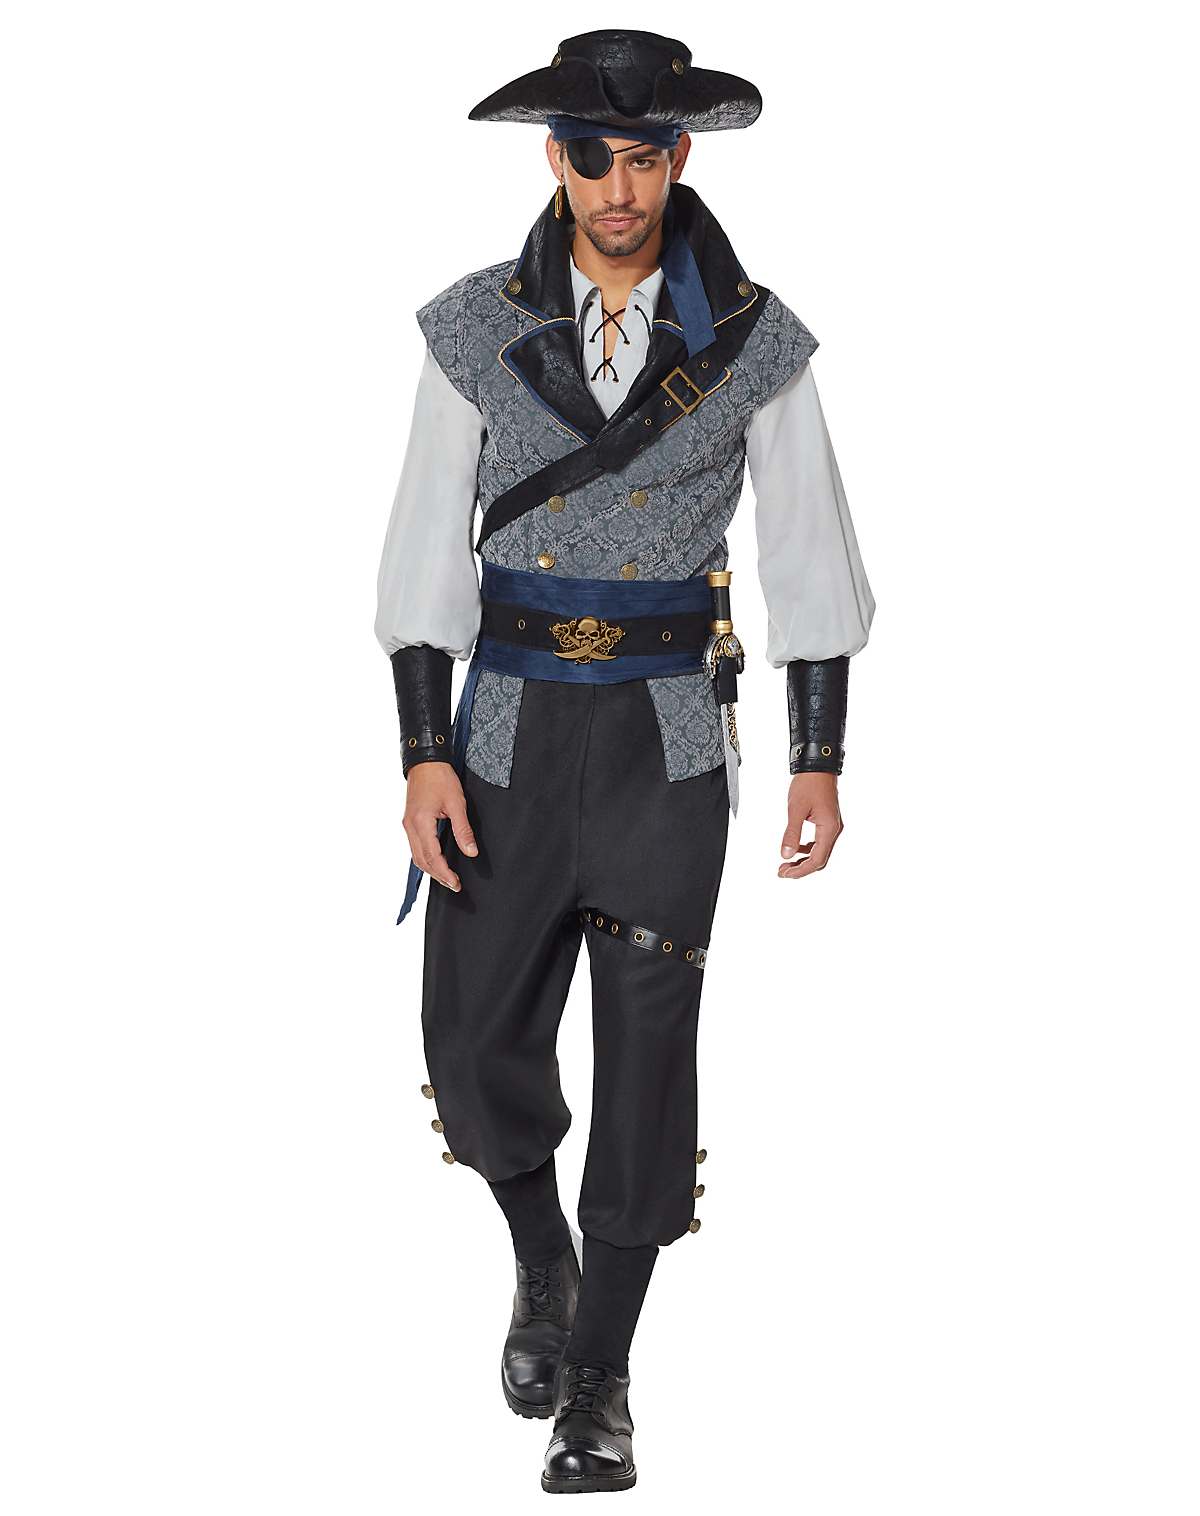 Adult Pirate Costume - The Signature Collection